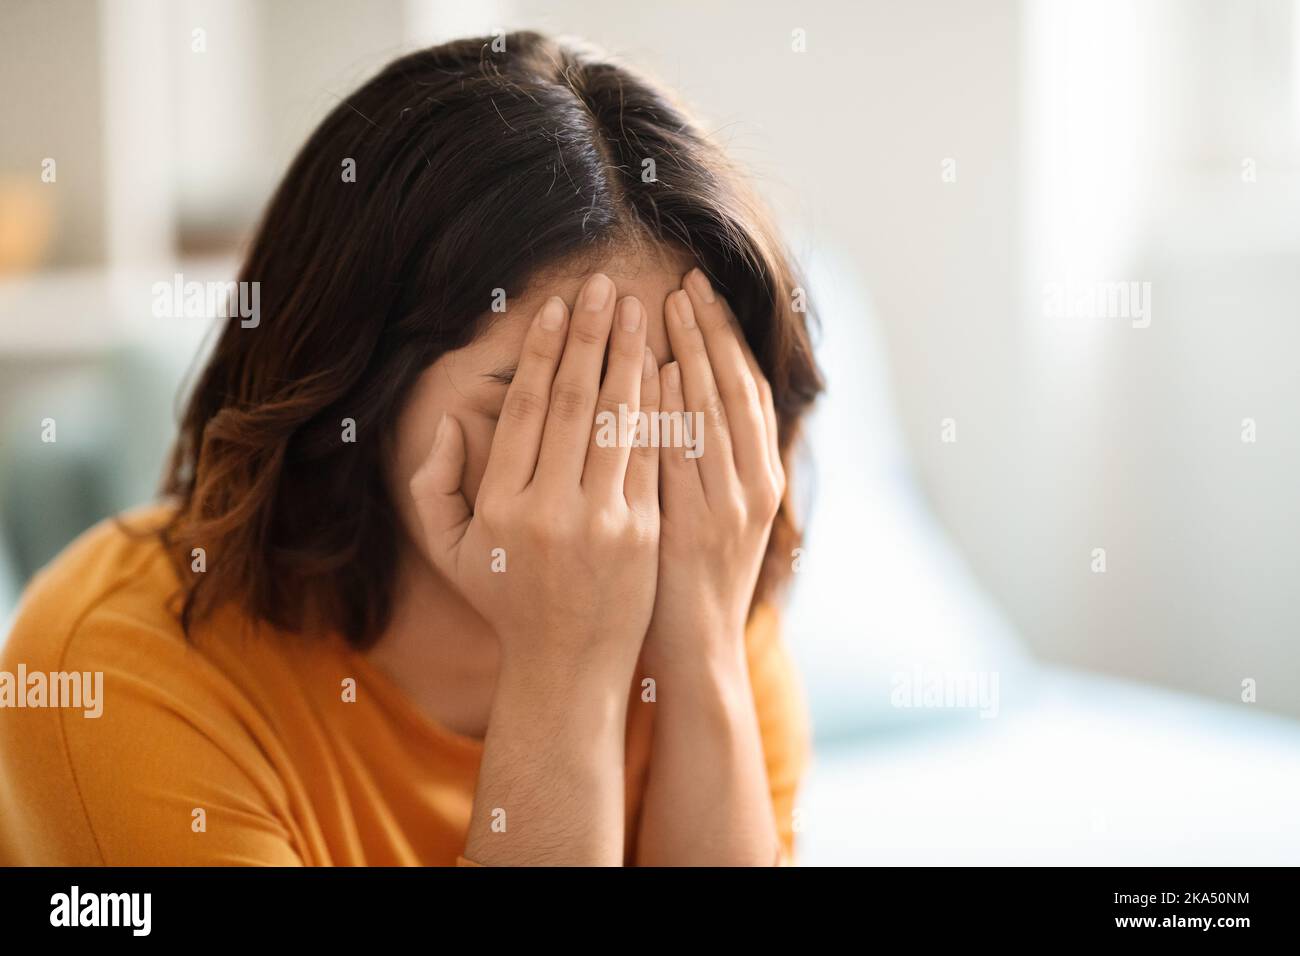 Mental Breakdown. Closeup Portrait Of Young Female Crying In Home Interior Stock Photo